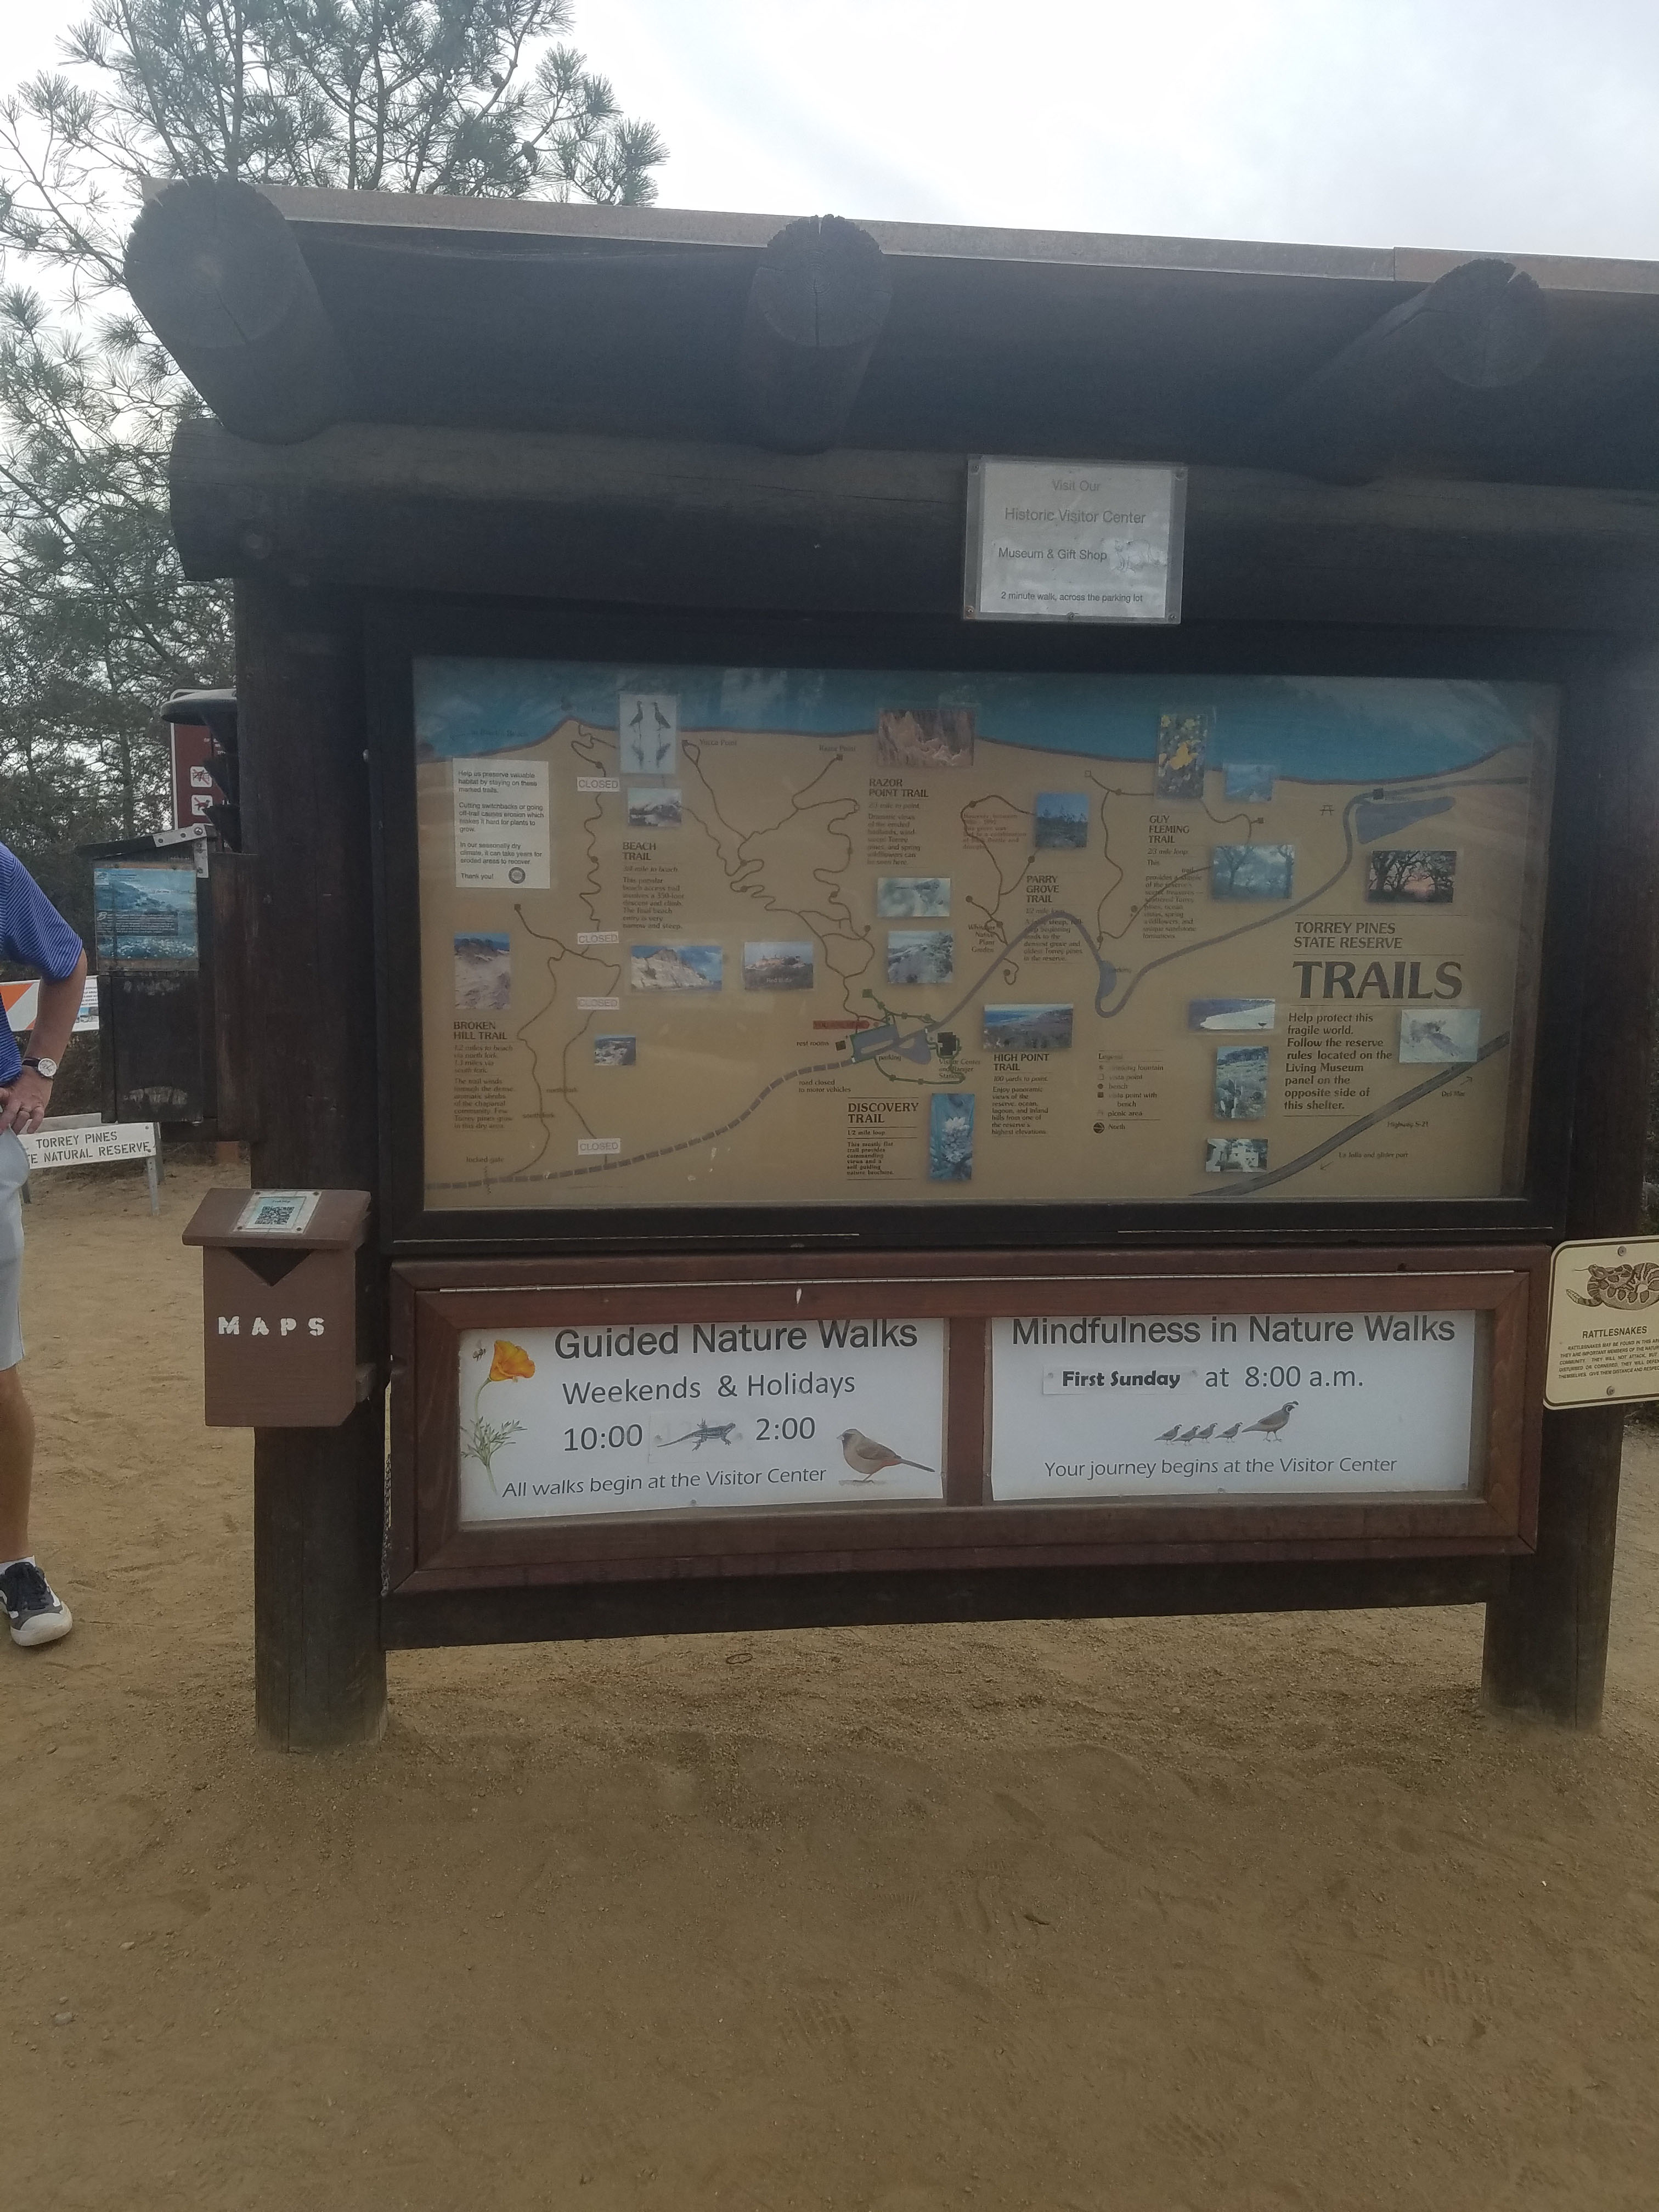  Torrey Pines State Natural Reserve Accessible Trails